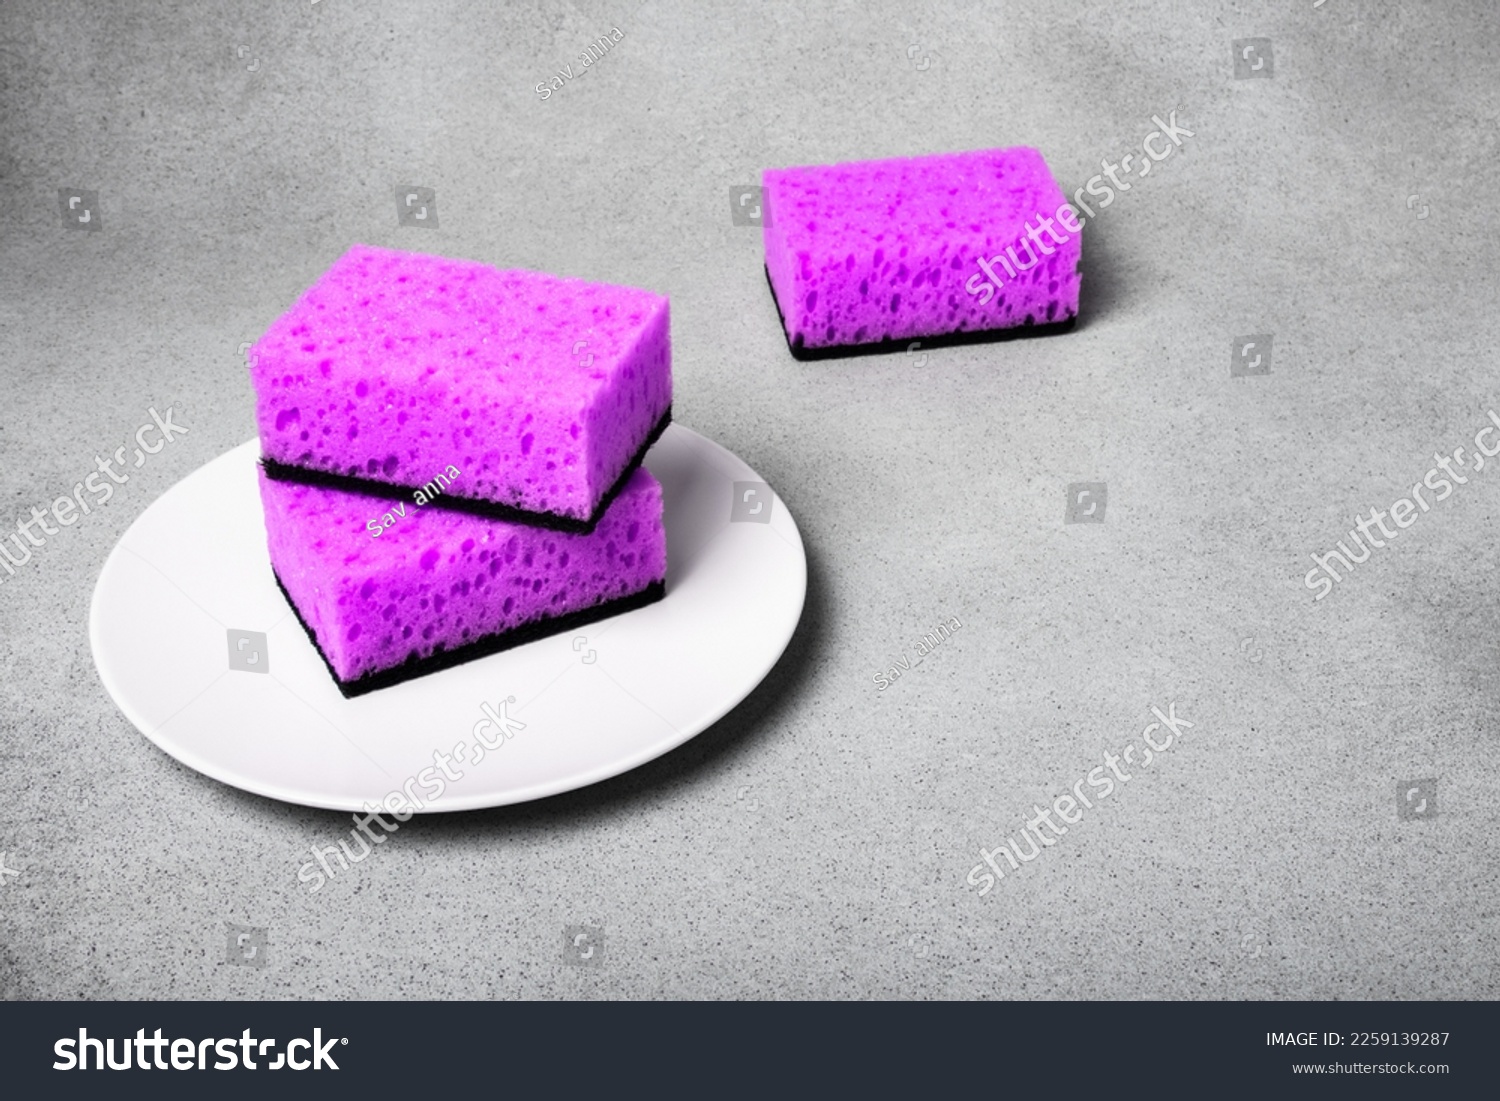 Lilac sponges for dishwashing on a white plate on a neutral gray background. Gentle dishwashing. House cleaning #2259139287